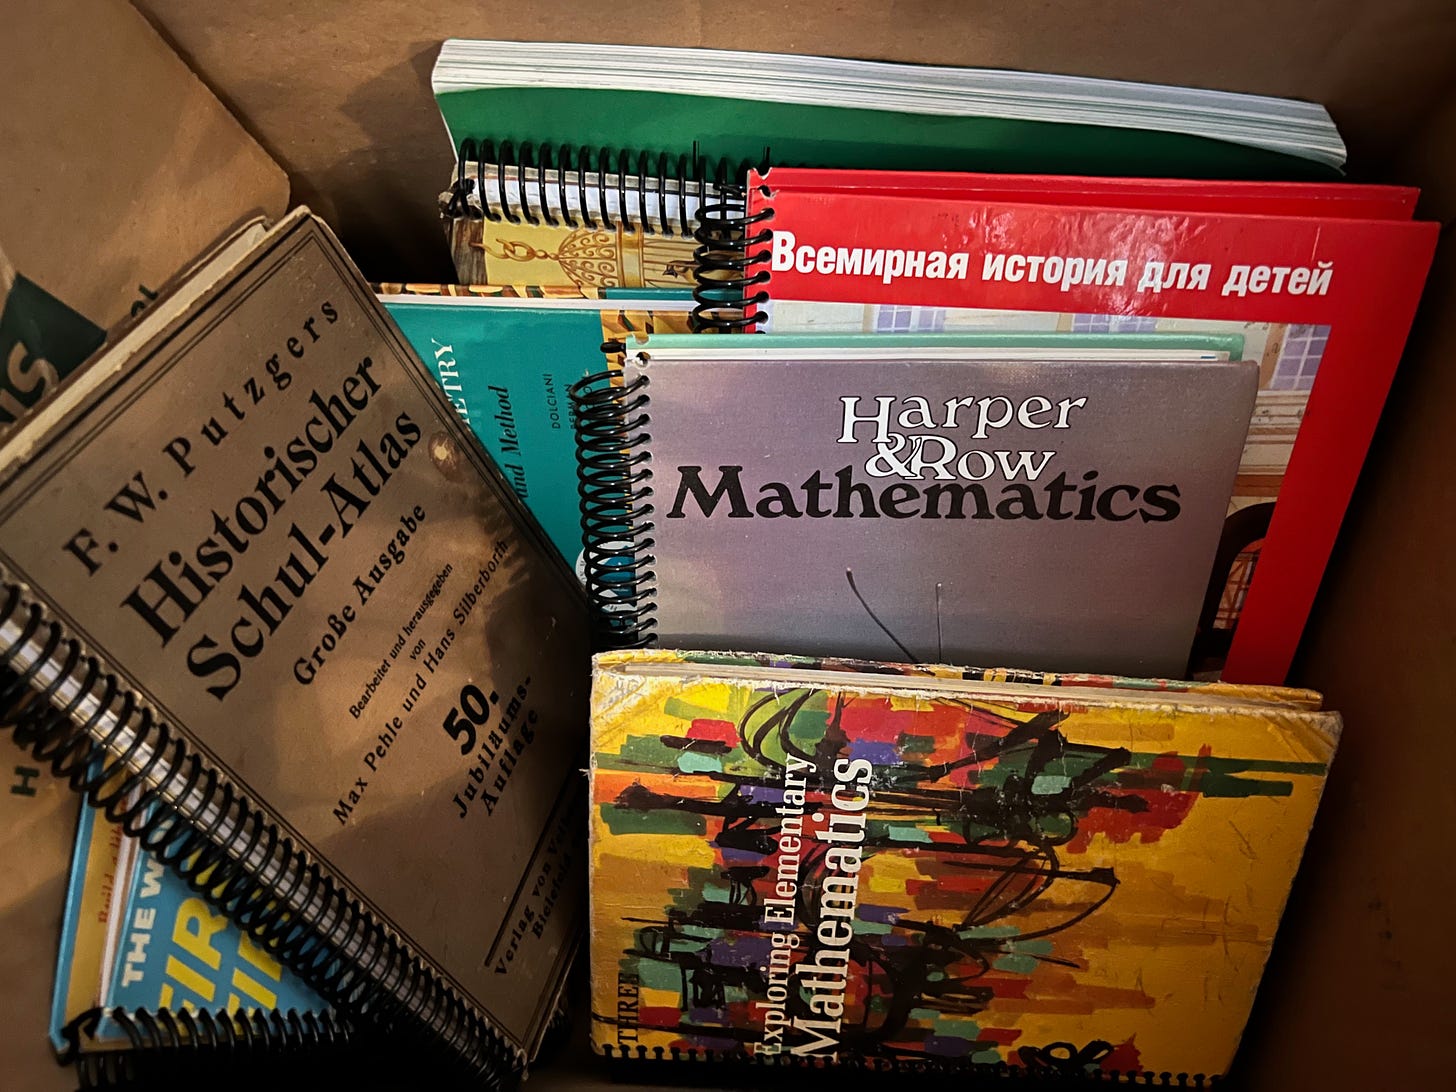 A box filled with what looks like old textbooks, mostly mathematics textbooks, spiral-bound. They are actually repurposed books filled with blank pages to write on.